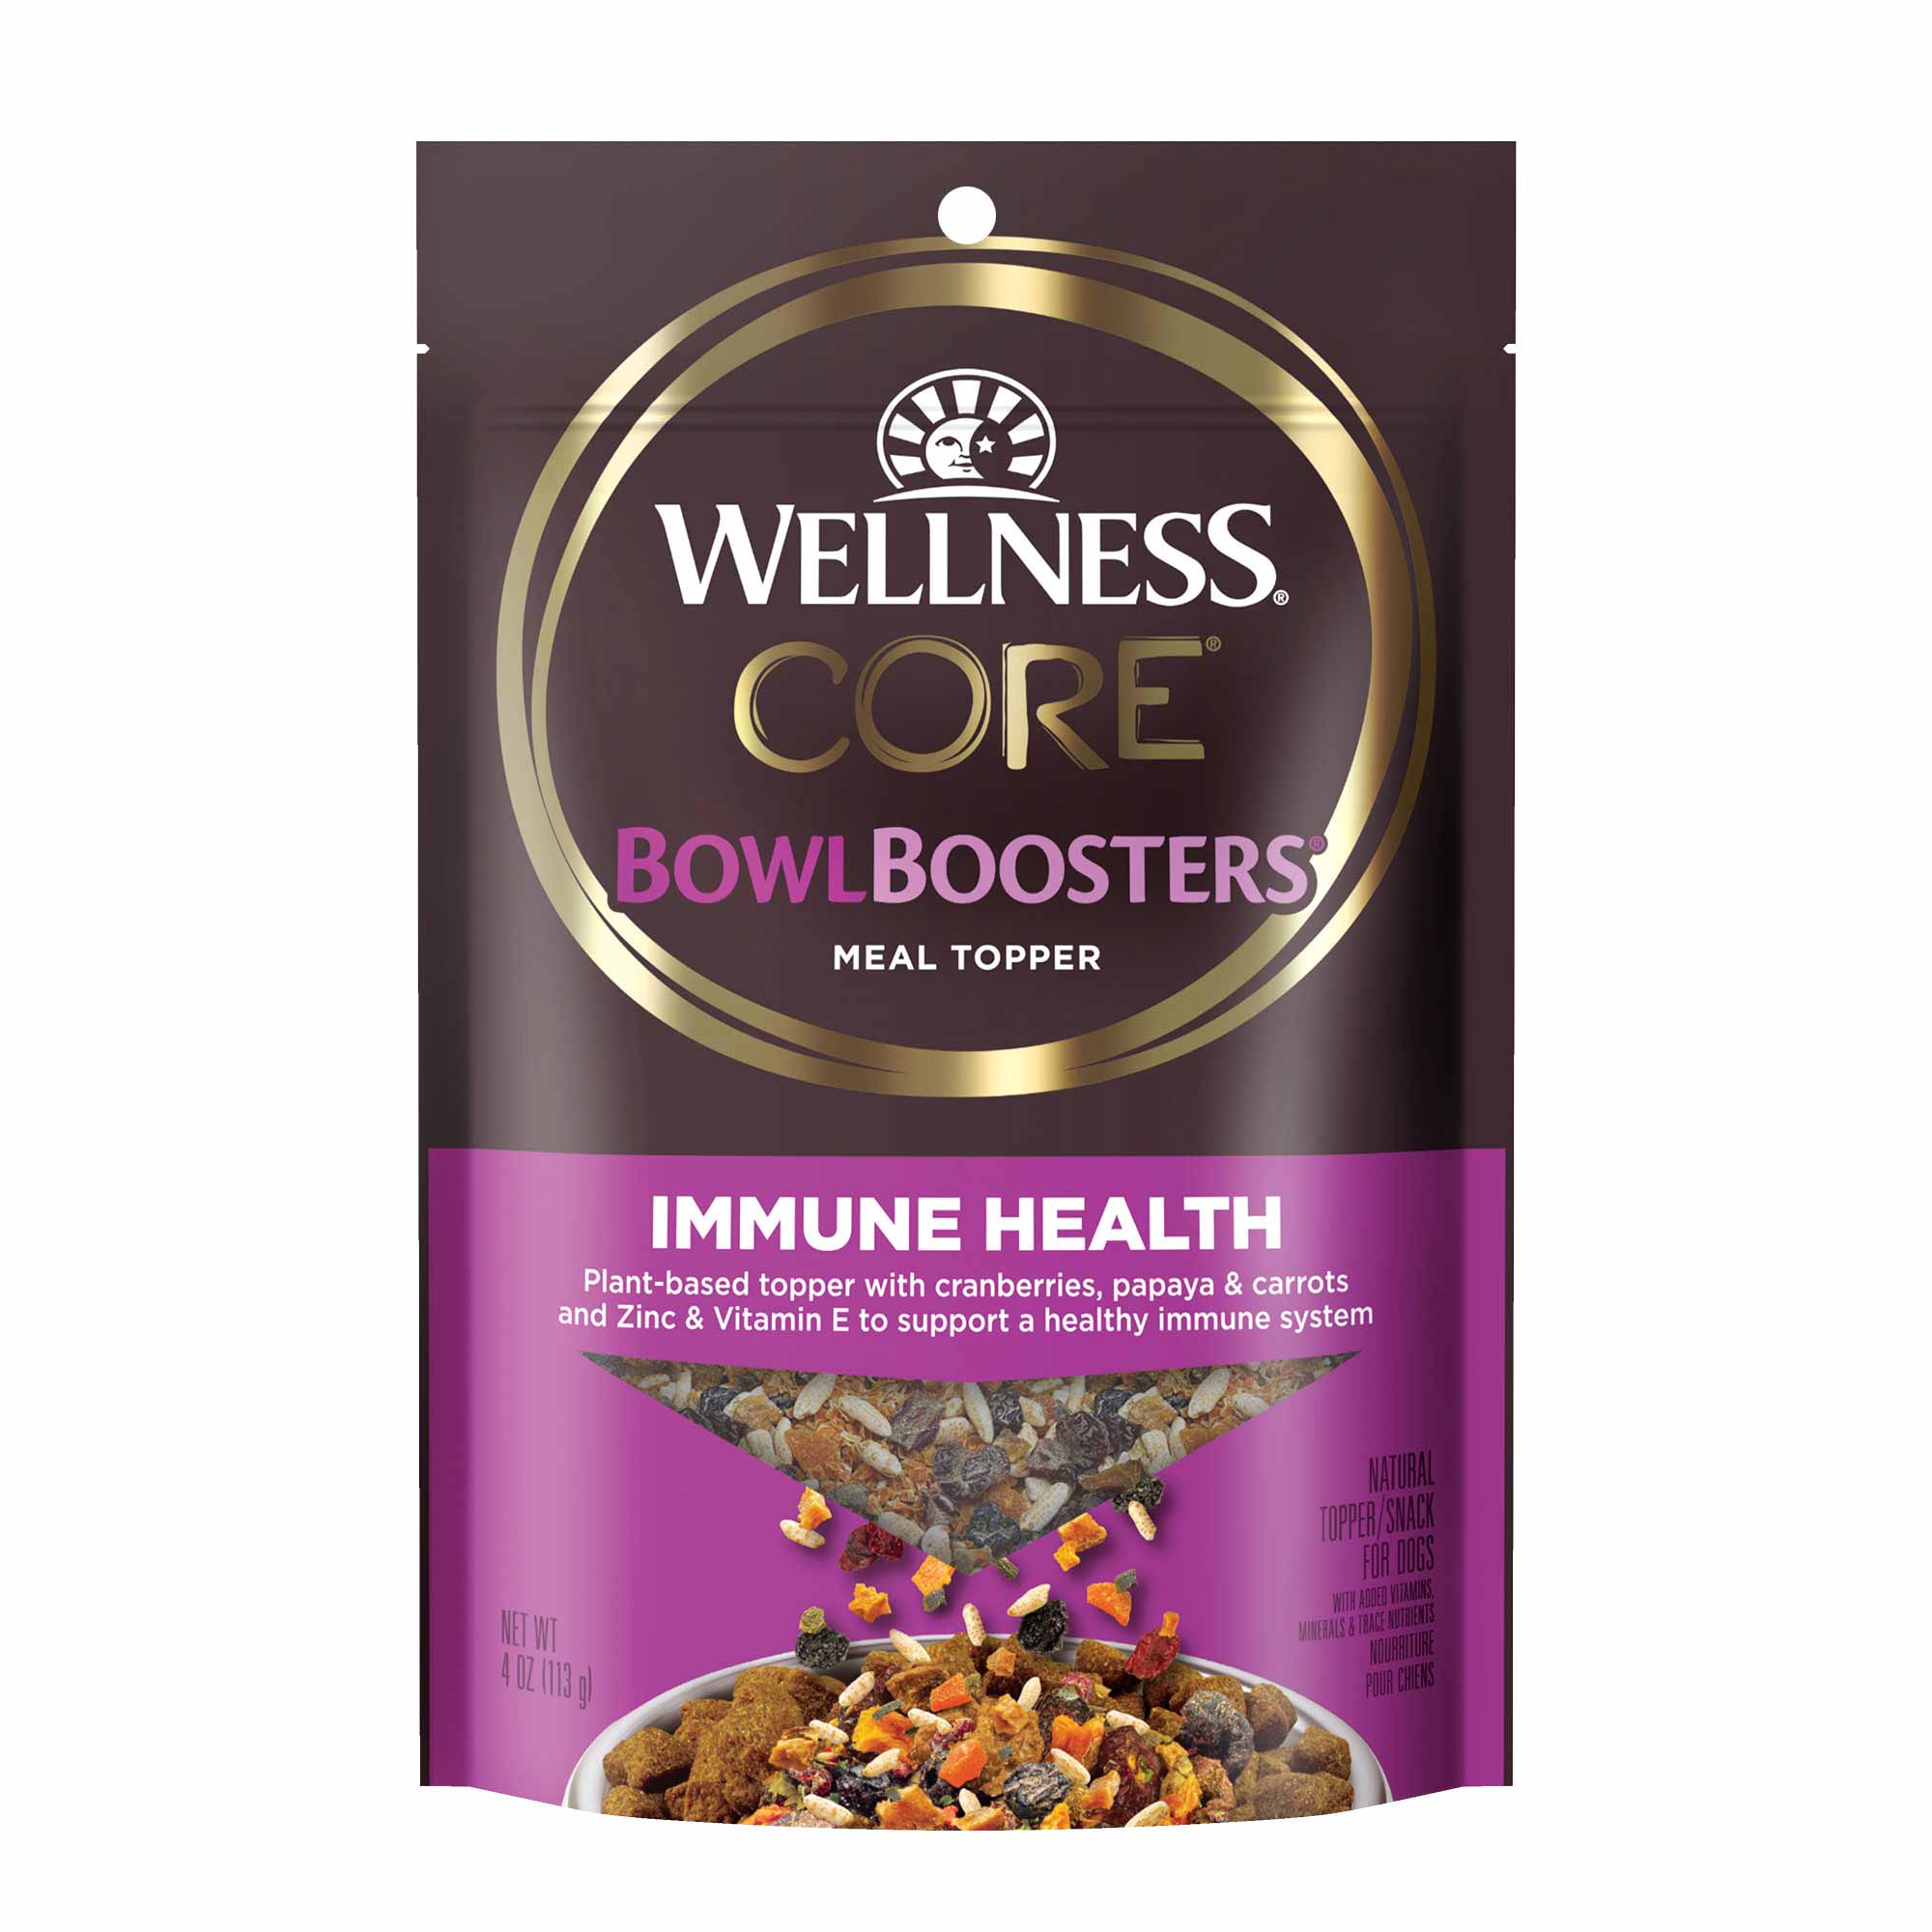 Wellness CORE Bowl Boosters, Functional Meal Topper for Immunity, Plant Based, 4 Ounce Bag